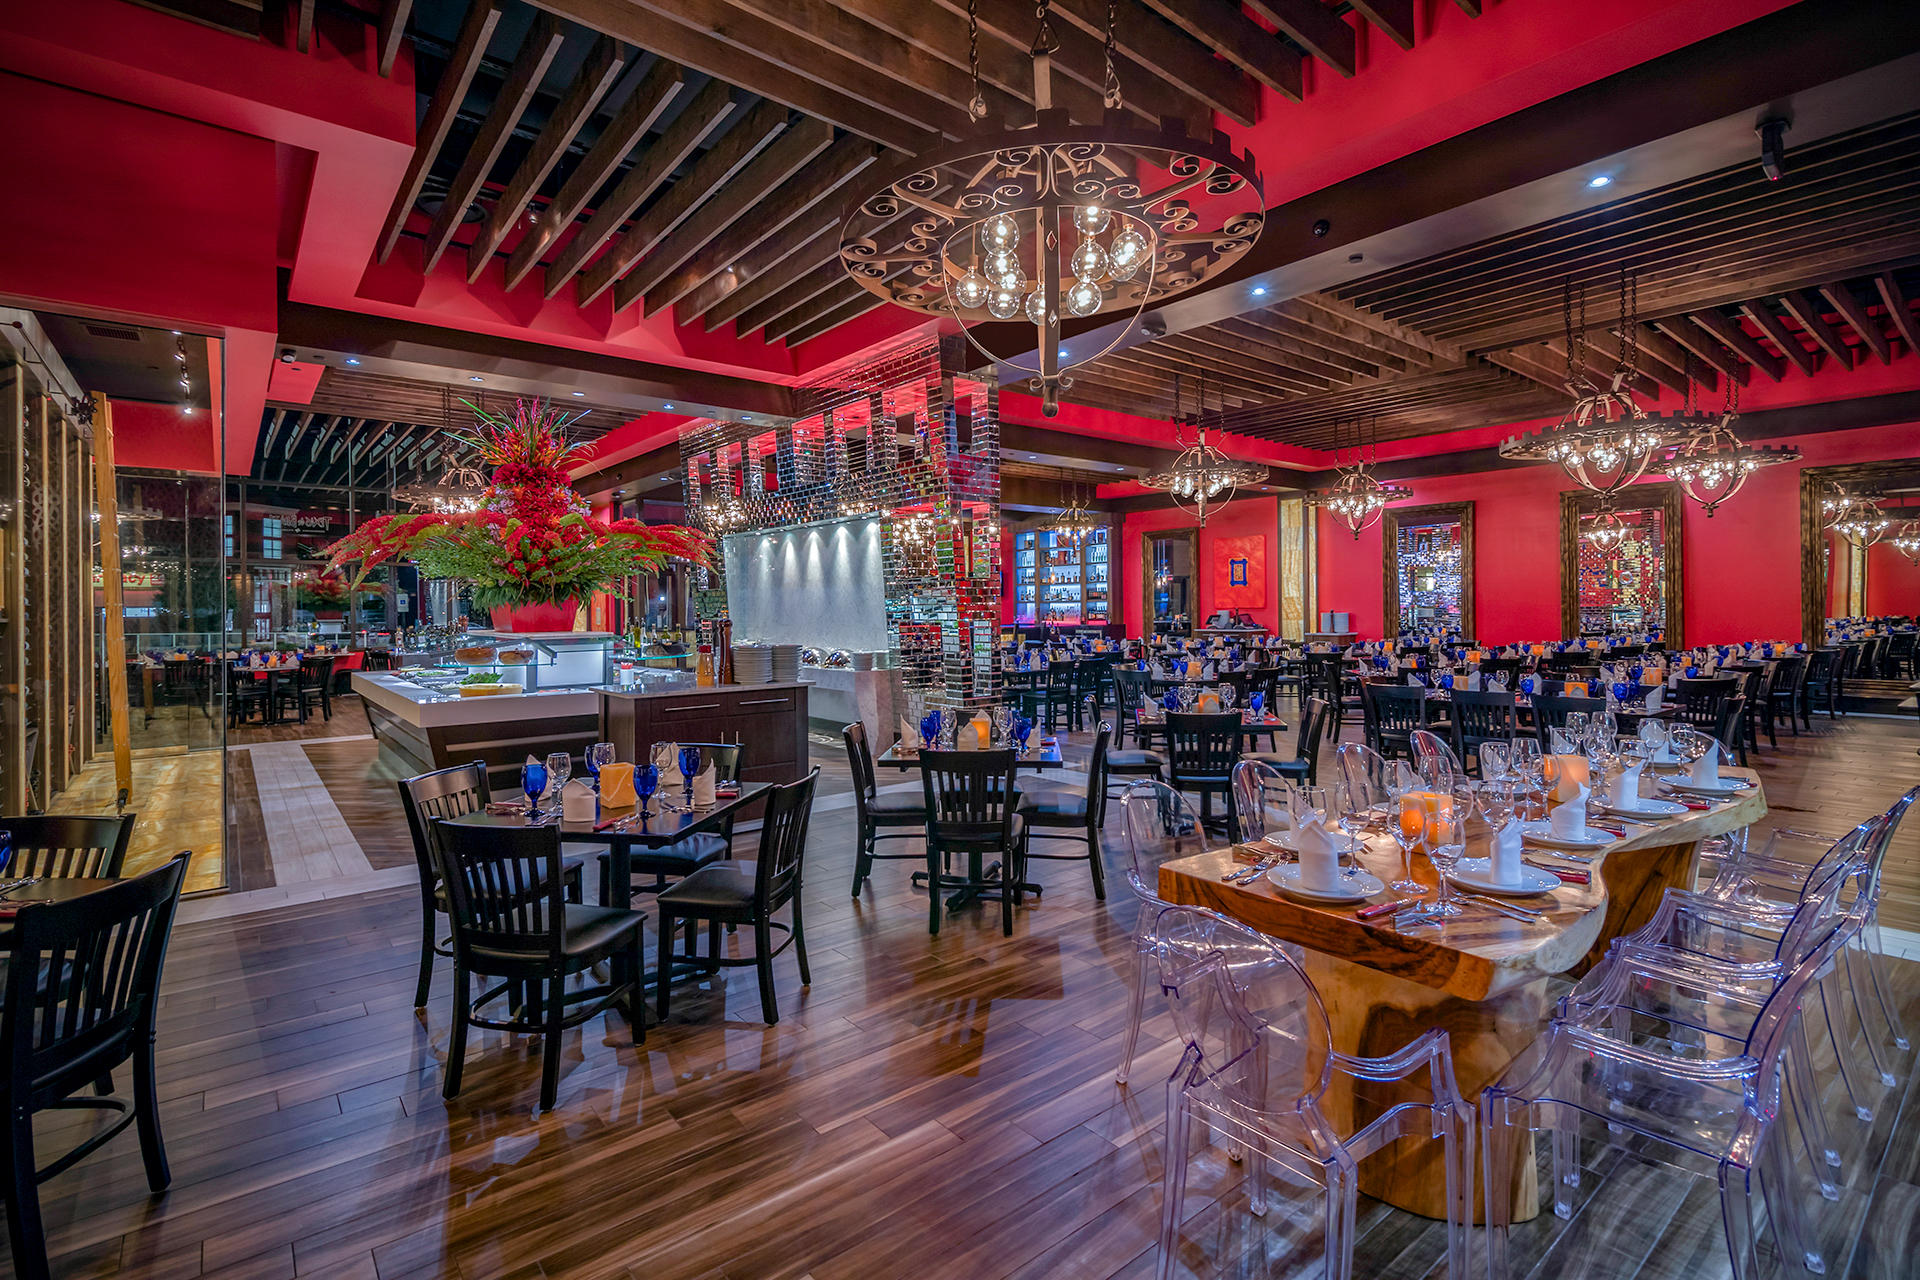 For a memorable gathering join us at Texas de Brazil, where the festivities – and your meal – never end.